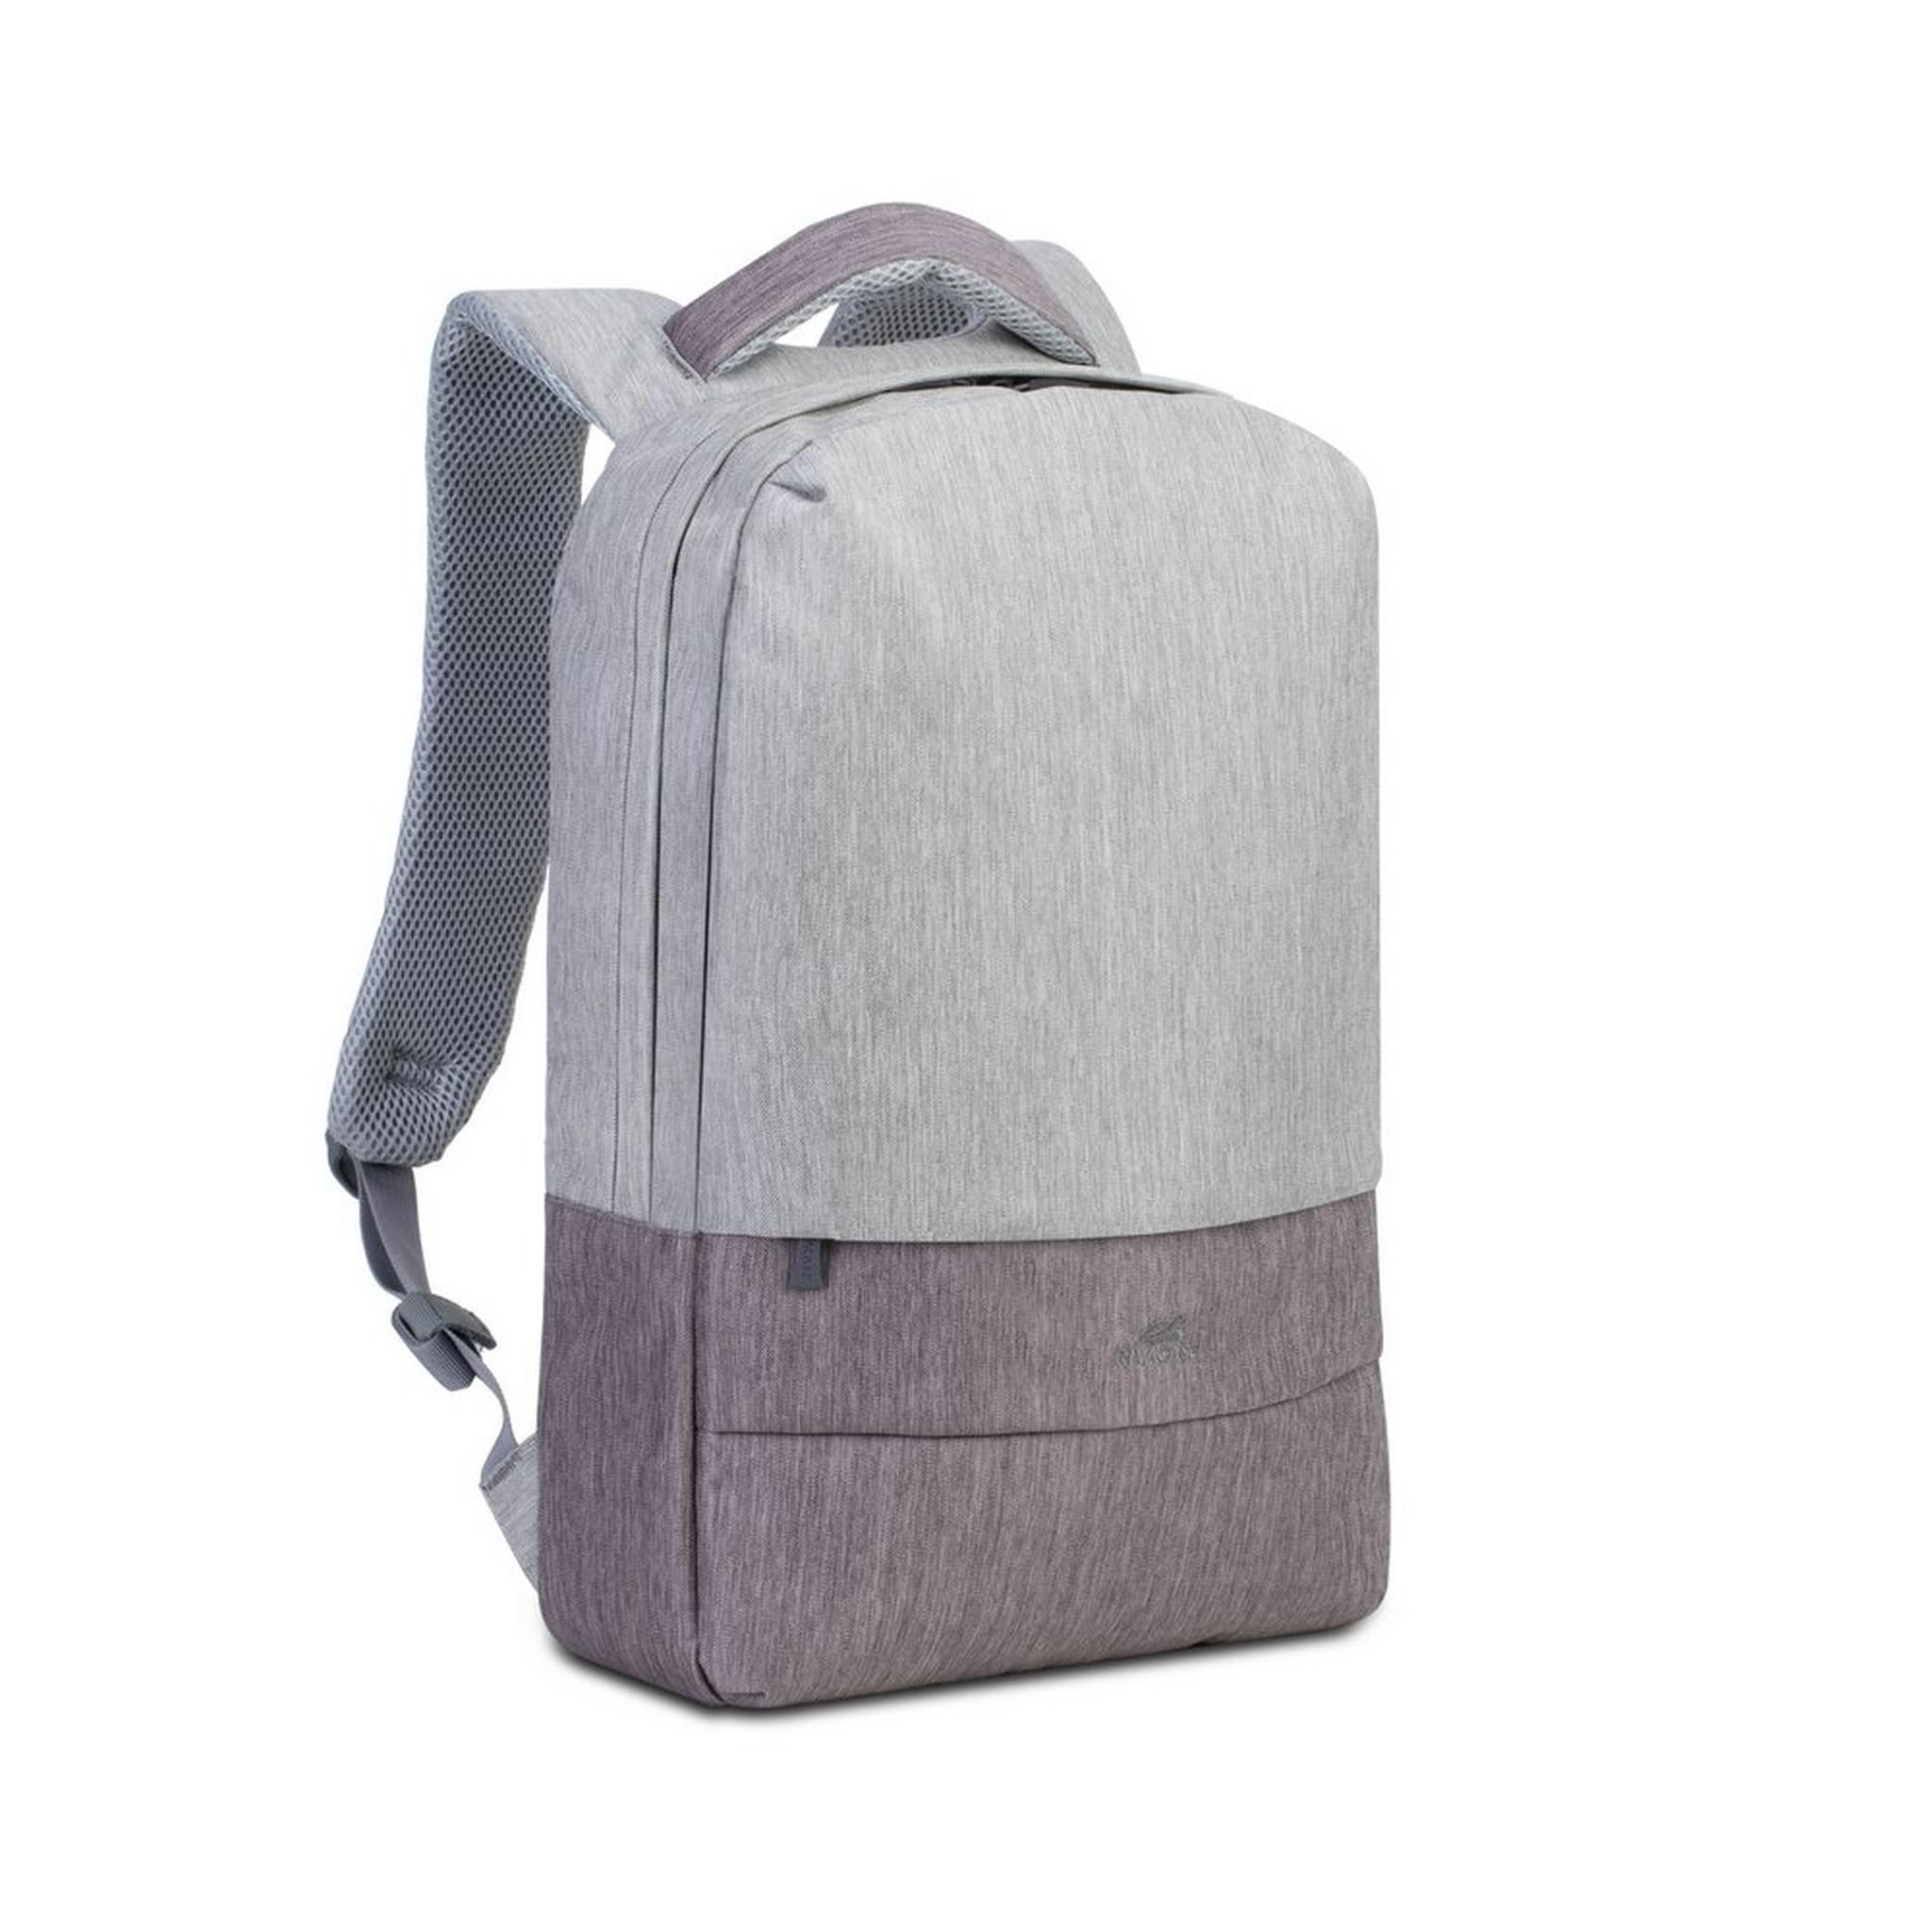 RIVACASE Prater Anti-Theft 15.6" Laptop Backpack - Mocha